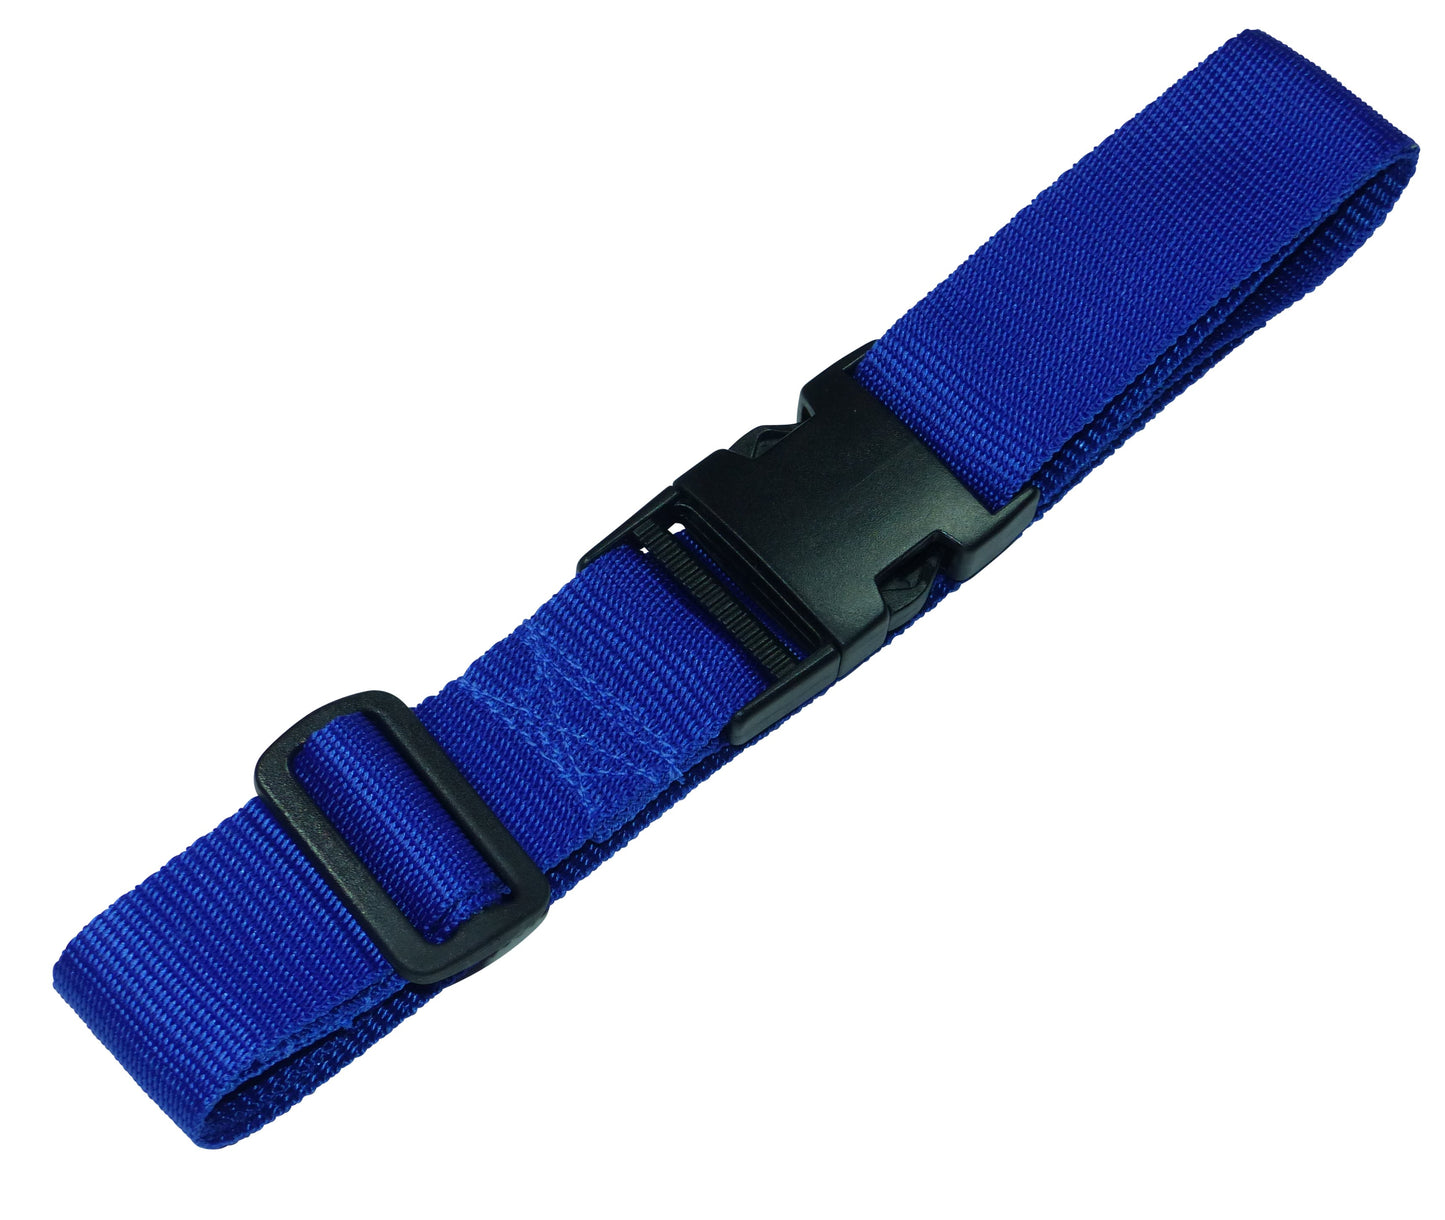 Benristraps 38mm Webbing Strap with Quick Release & Length-Adjusting Buckles in blue